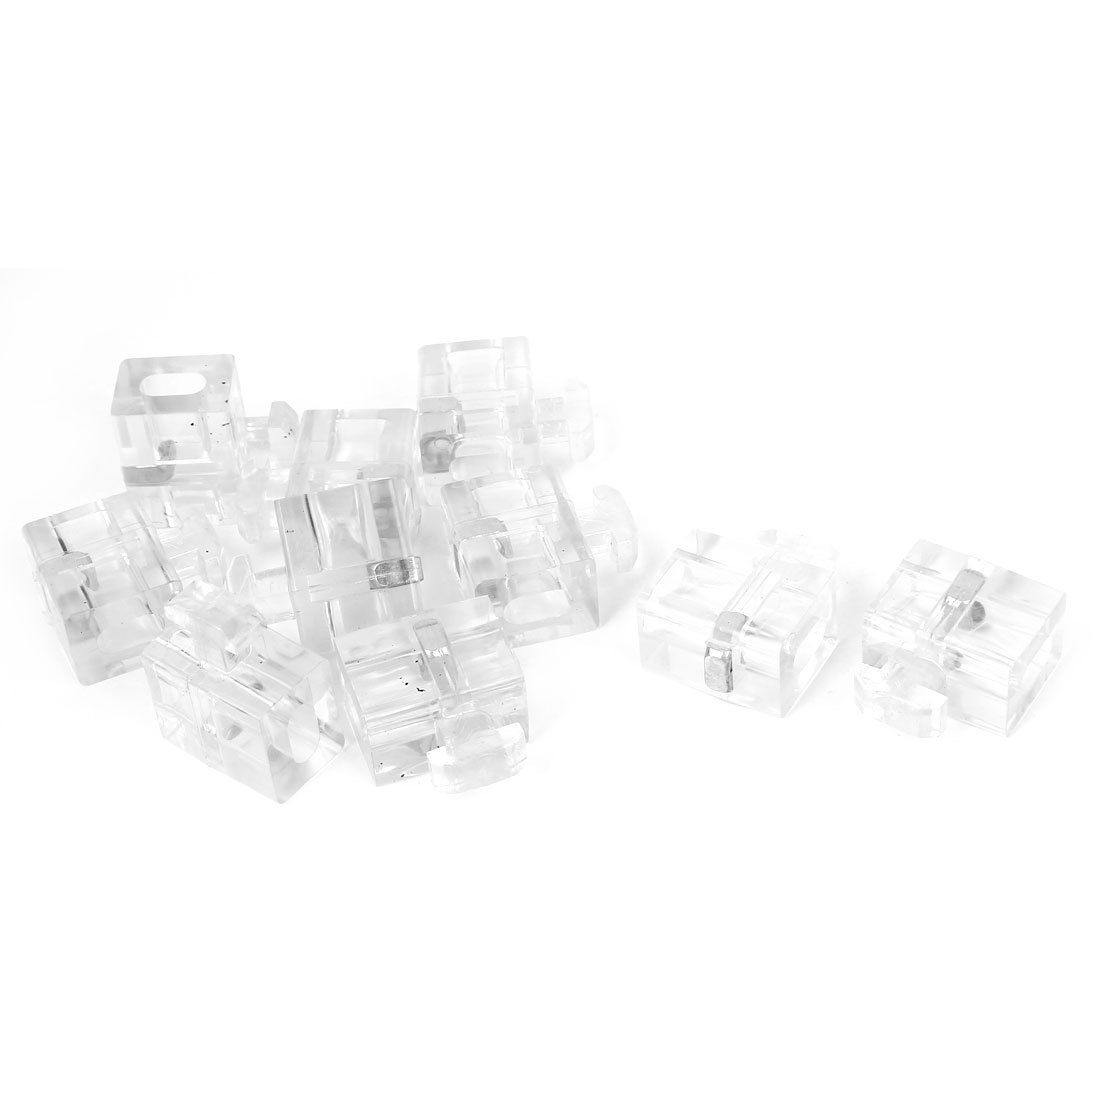 40 Series Aluminium fittings Spacer Partitions Glass connection block type A -Pack of 1 - Extrusion and CNC